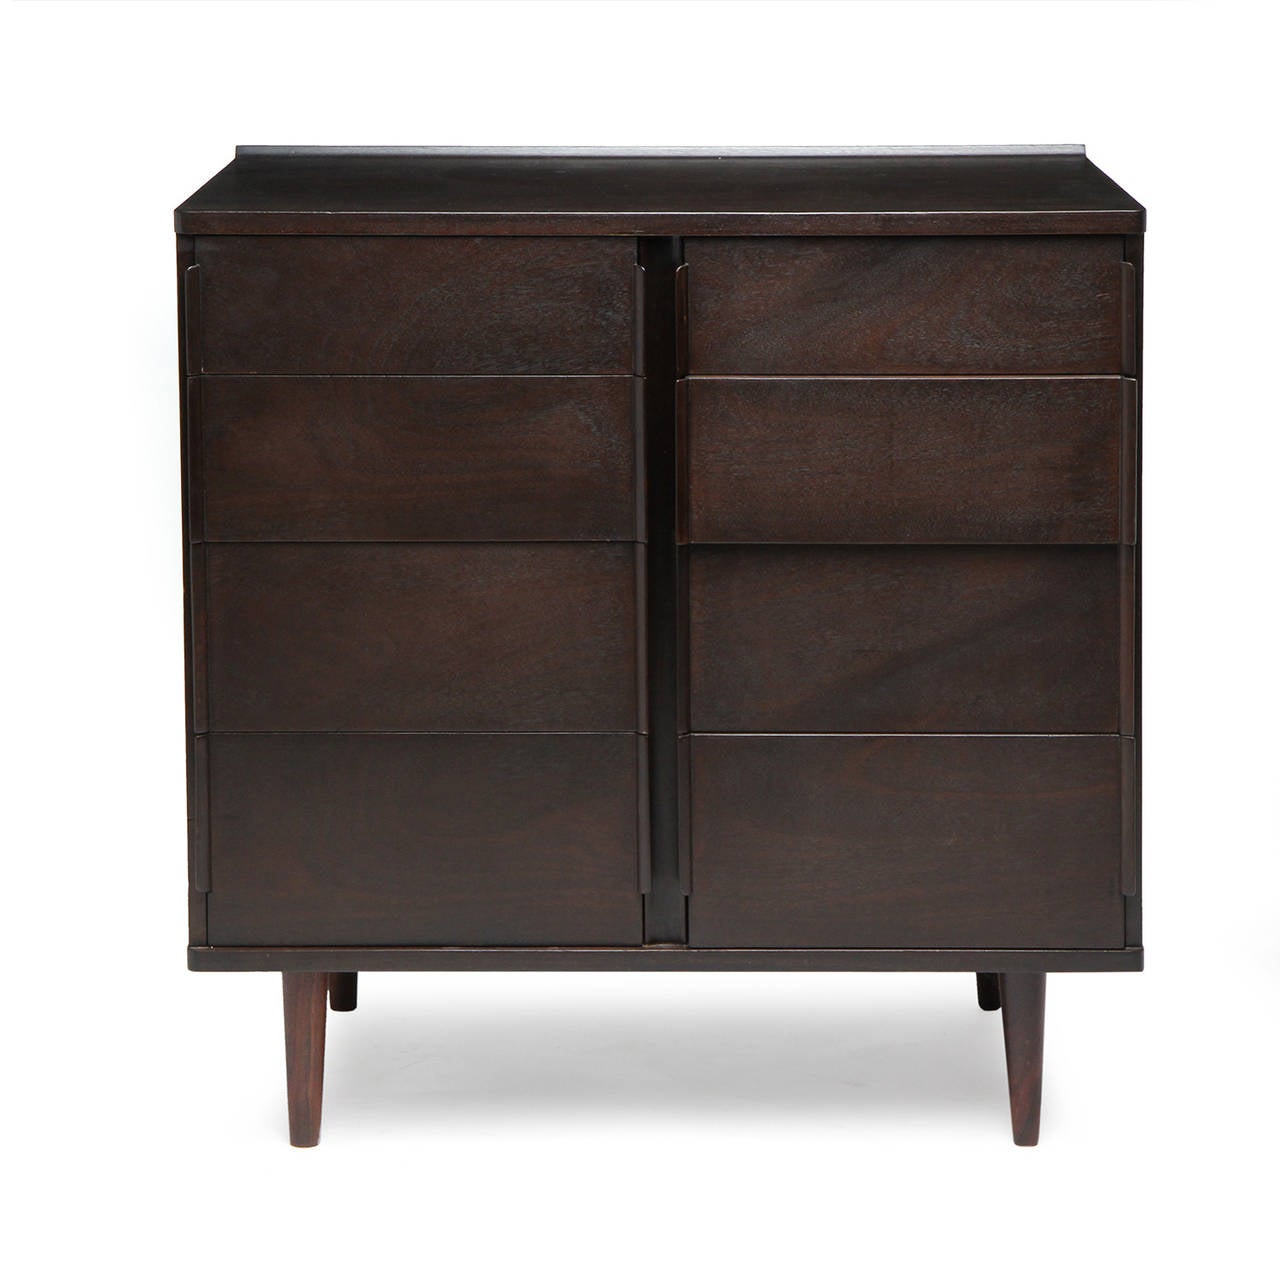 An elegant and well proportioned eight (8) drawer cabinet in ebonized mahogany, having distinctive laminated end pulls, on tapered dowel legs.